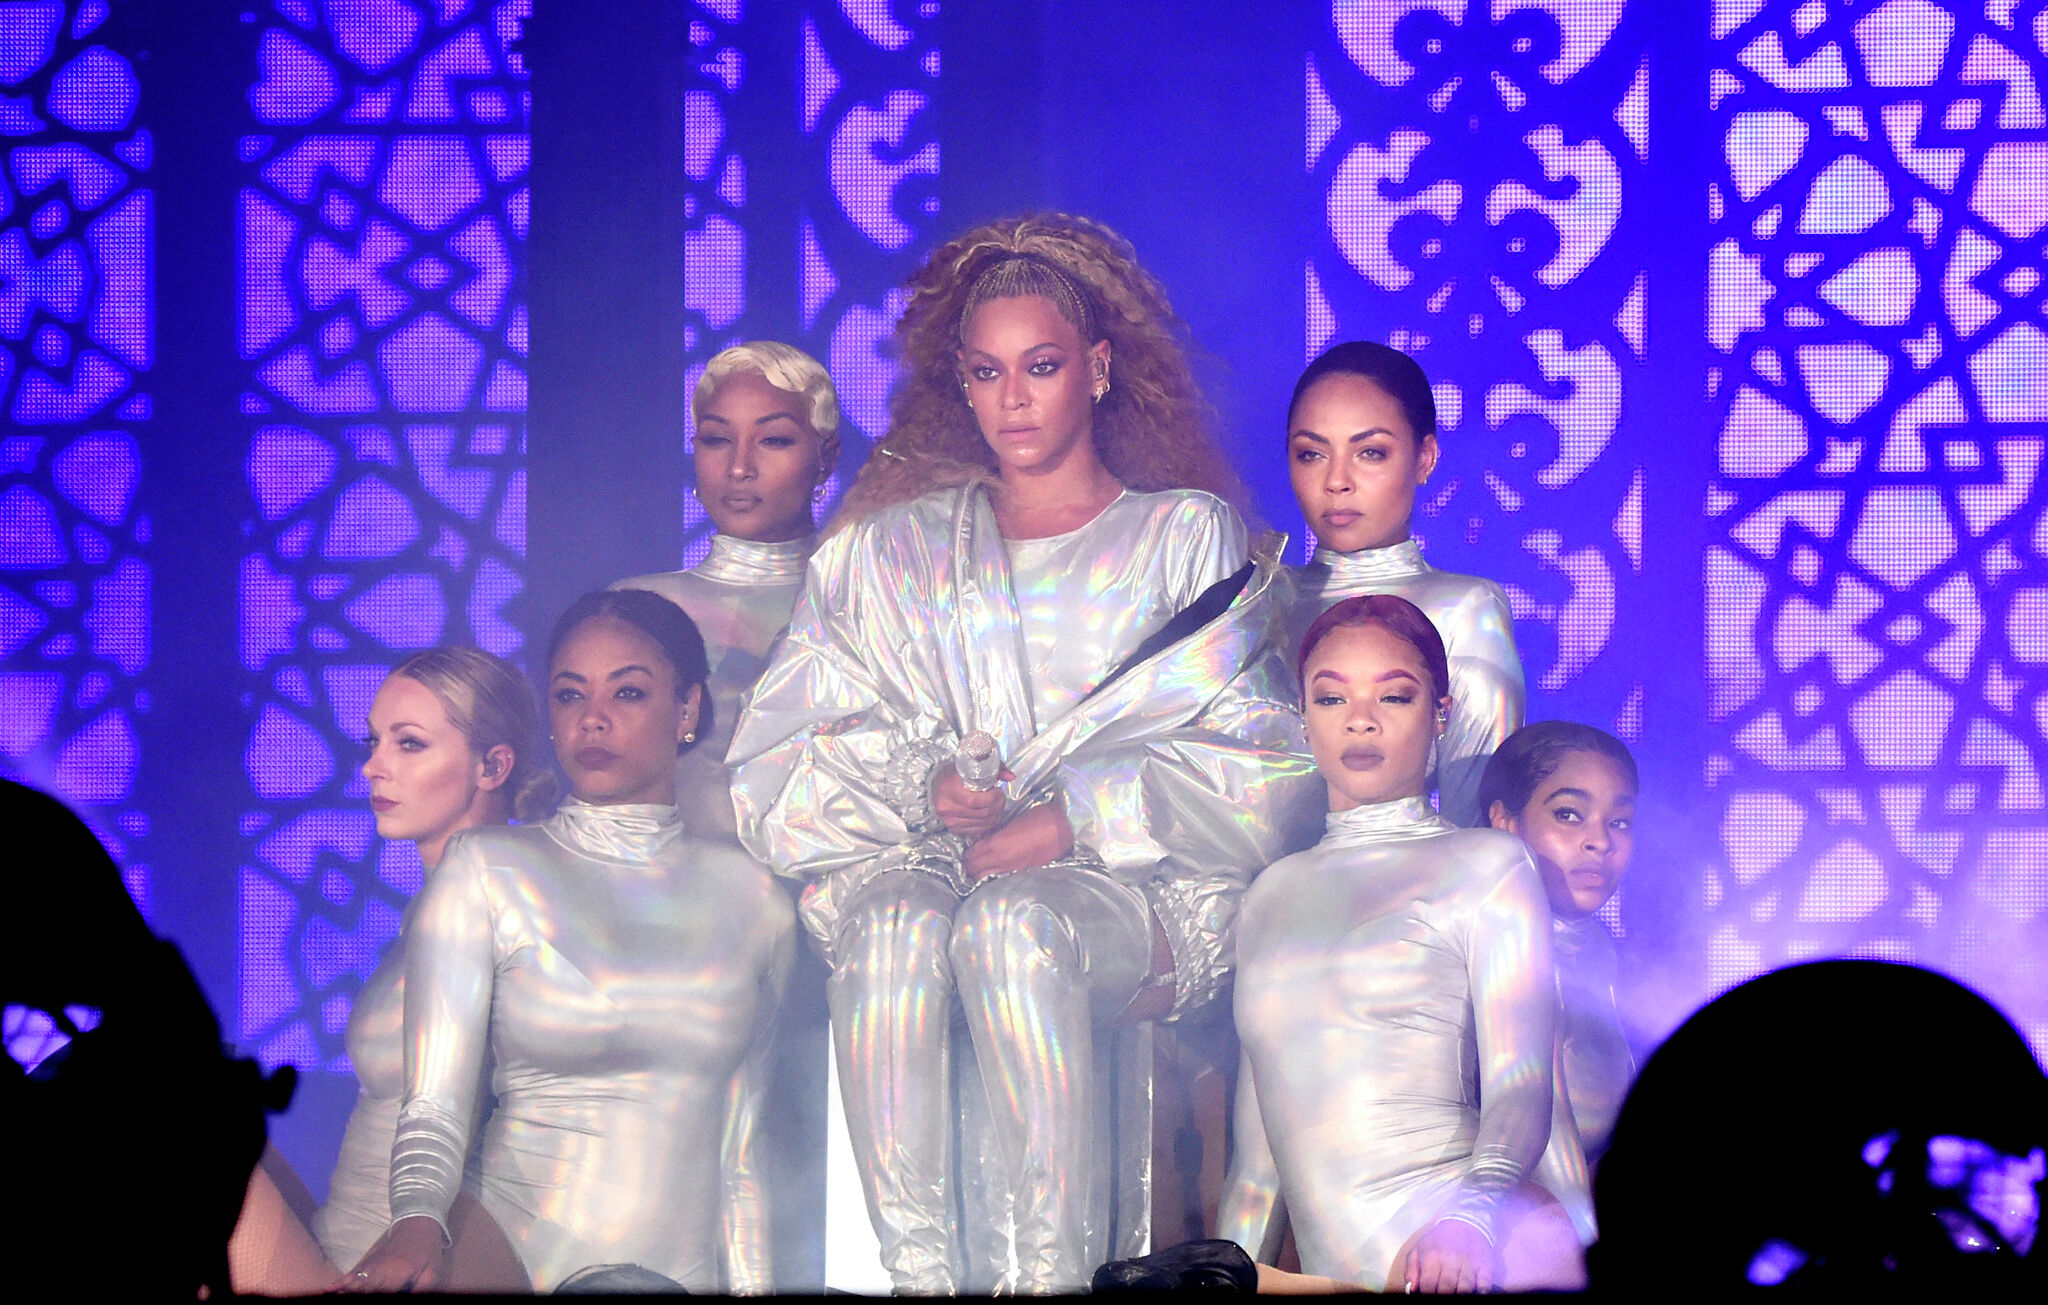 Beyoncé could set off another Ticketmaster fiasco with 2023 tour